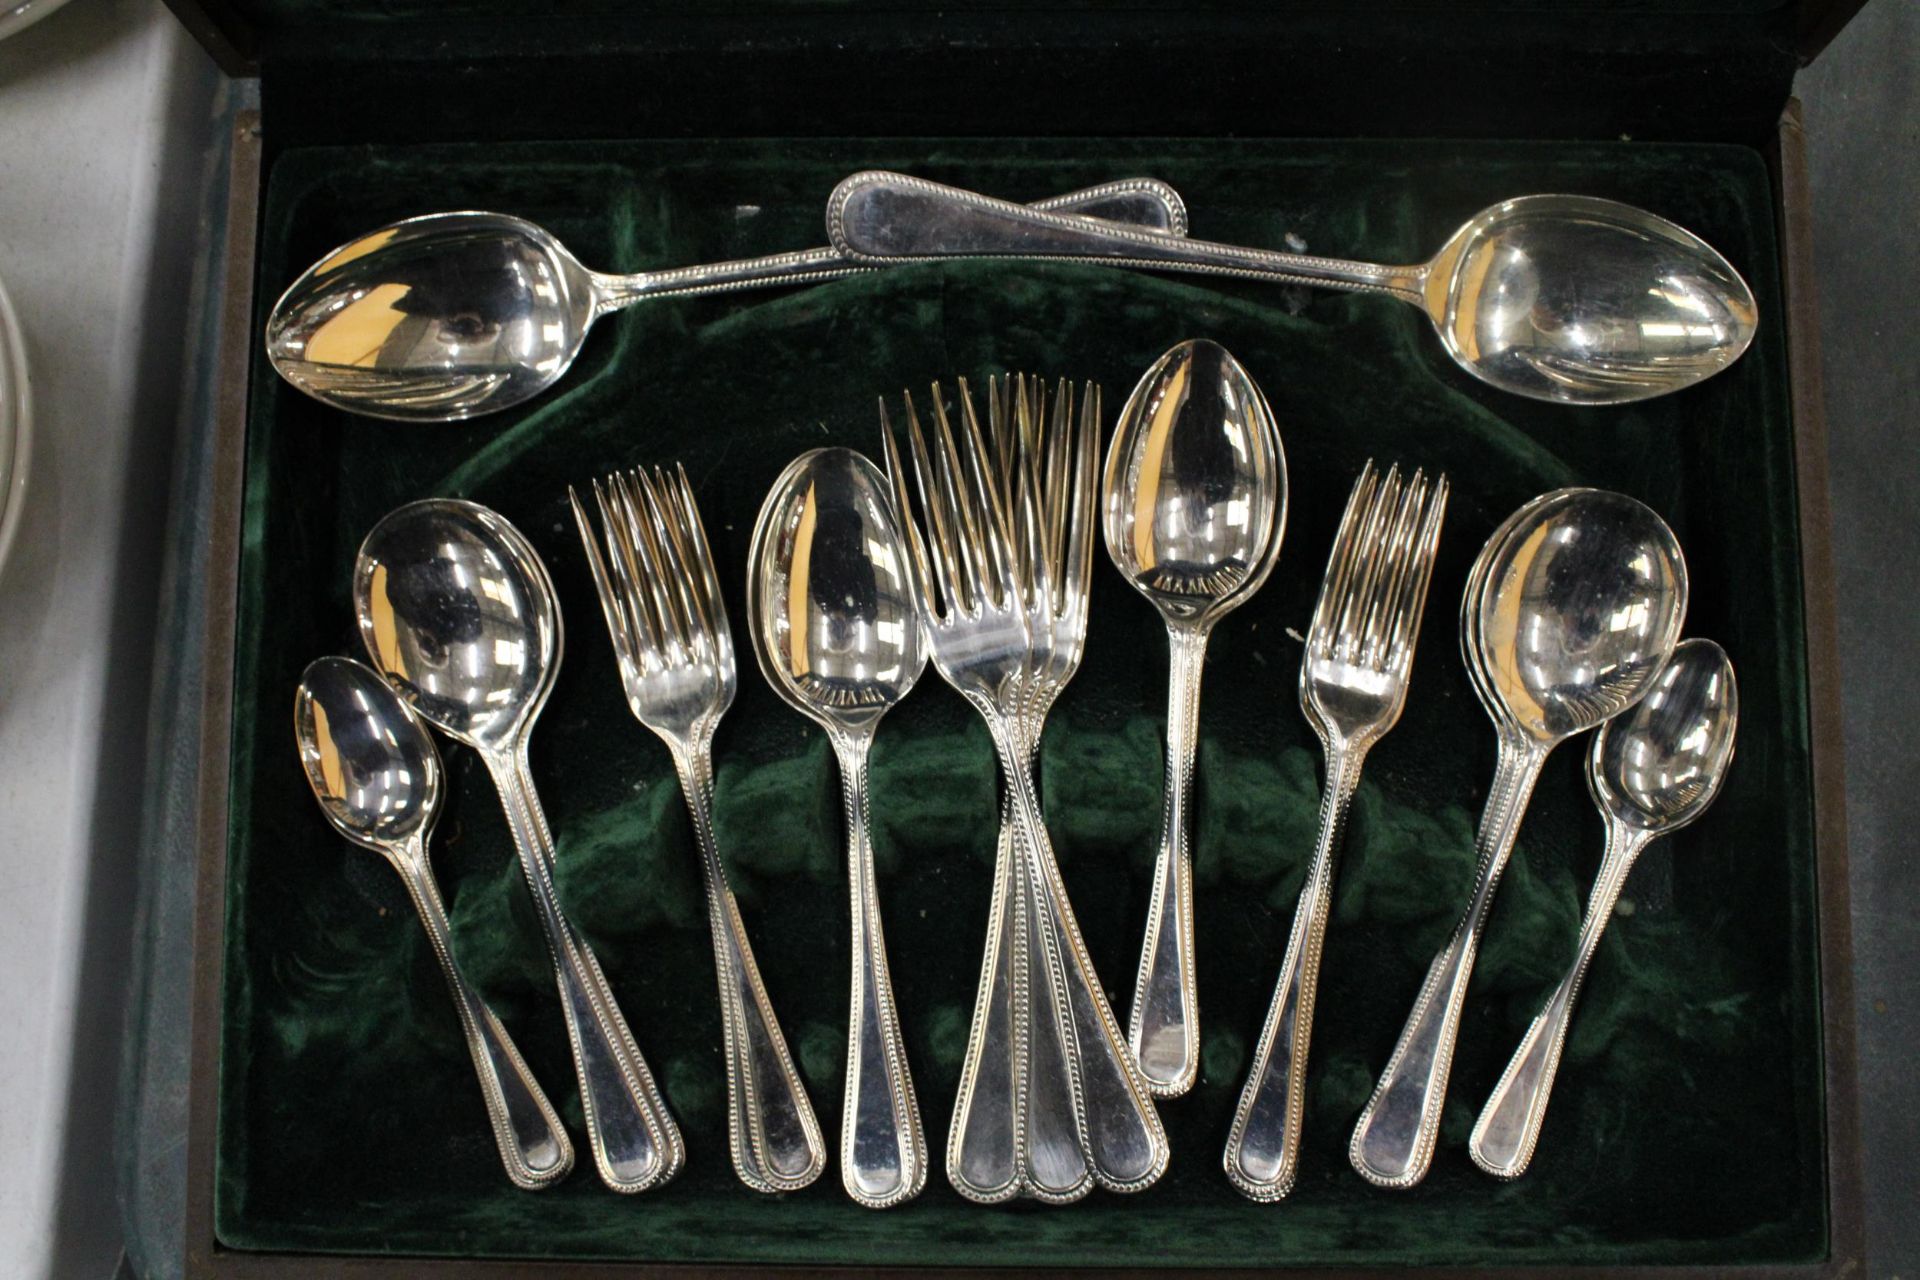 TWO CASED CANTEENS OF CUTLERY, ONE IS COMPLETE, THE OTHER HAS THREE TEASPOONS MISSING - Image 8 of 8